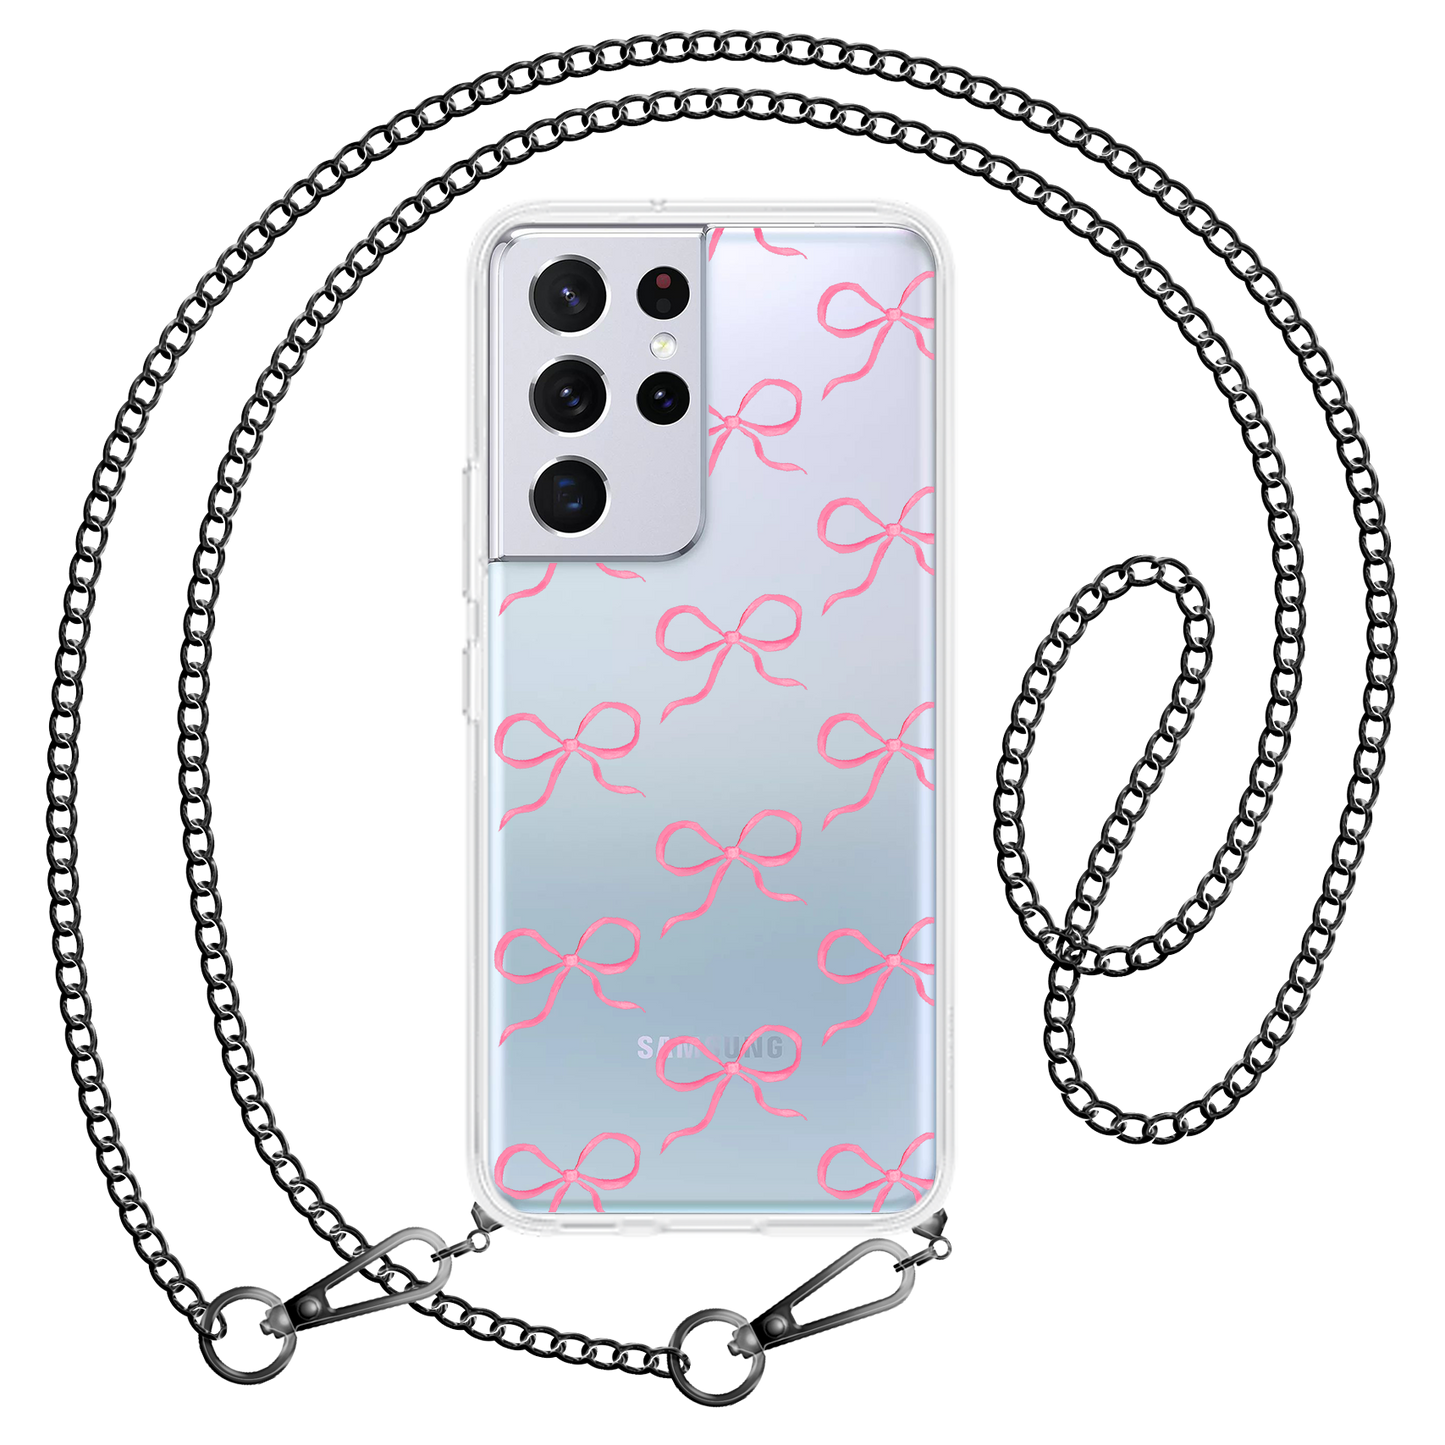 Android Rearguard Hybrid Case - Coquette Pink Bow